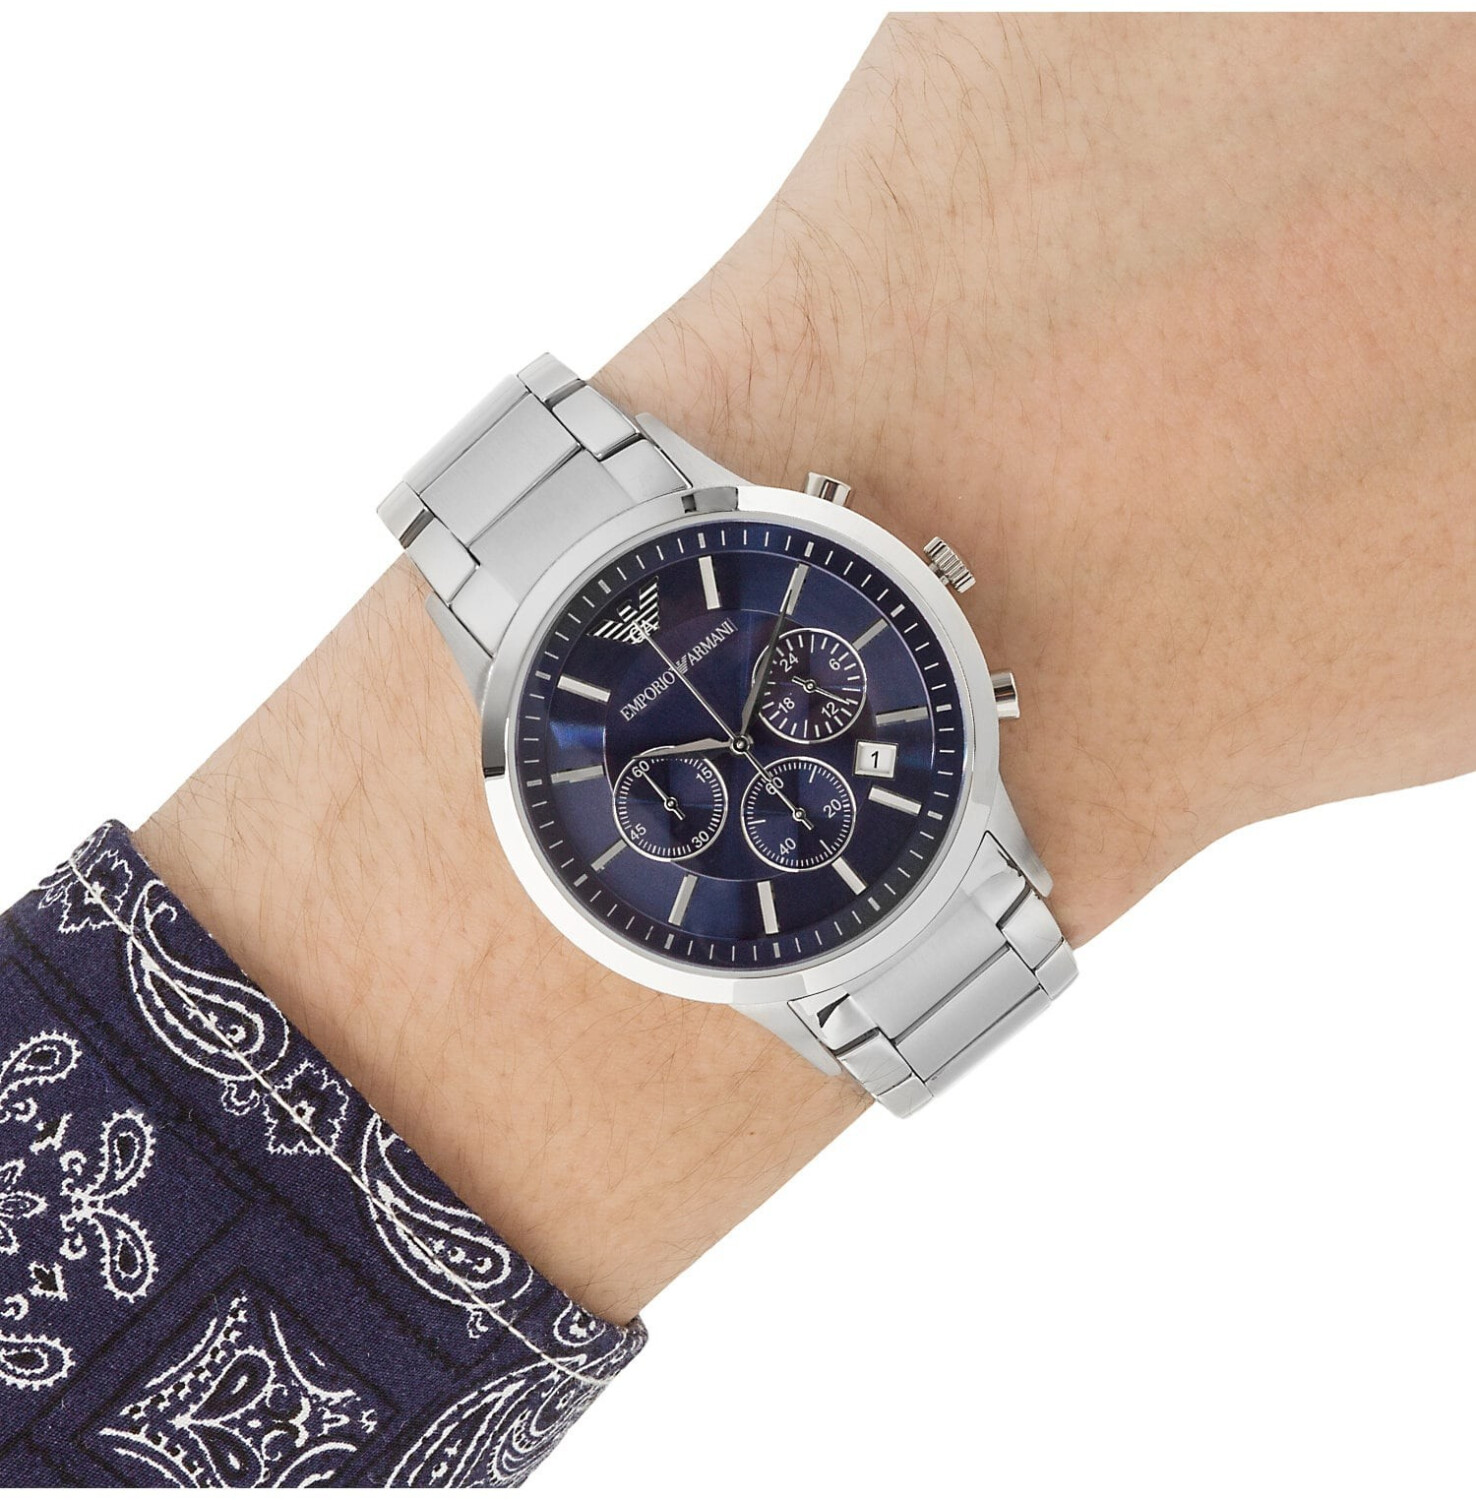 Buy Emporio Armani Renato Chronograph £67.53 Best on AR2448 (Today) Deals from –